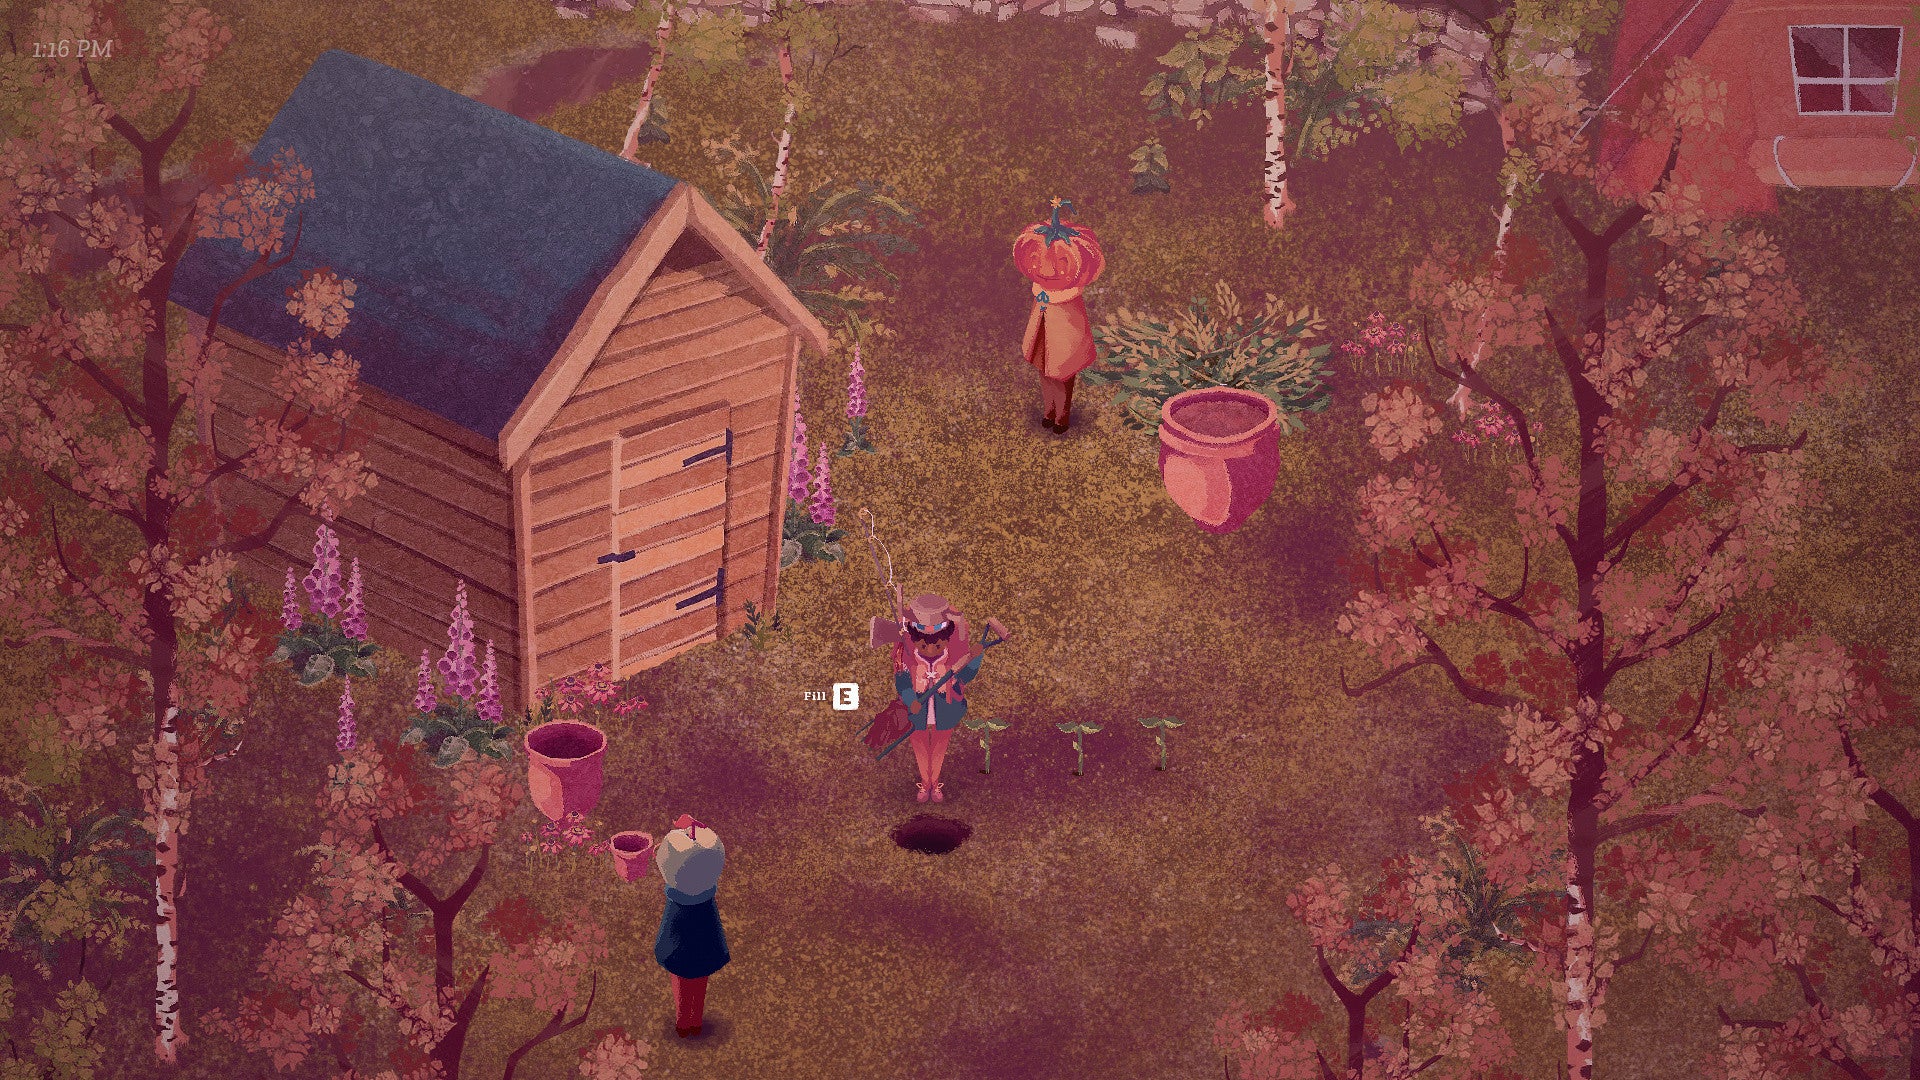 Beautiful gardening sim The Garden Path is like Animal Crossing without the hustle